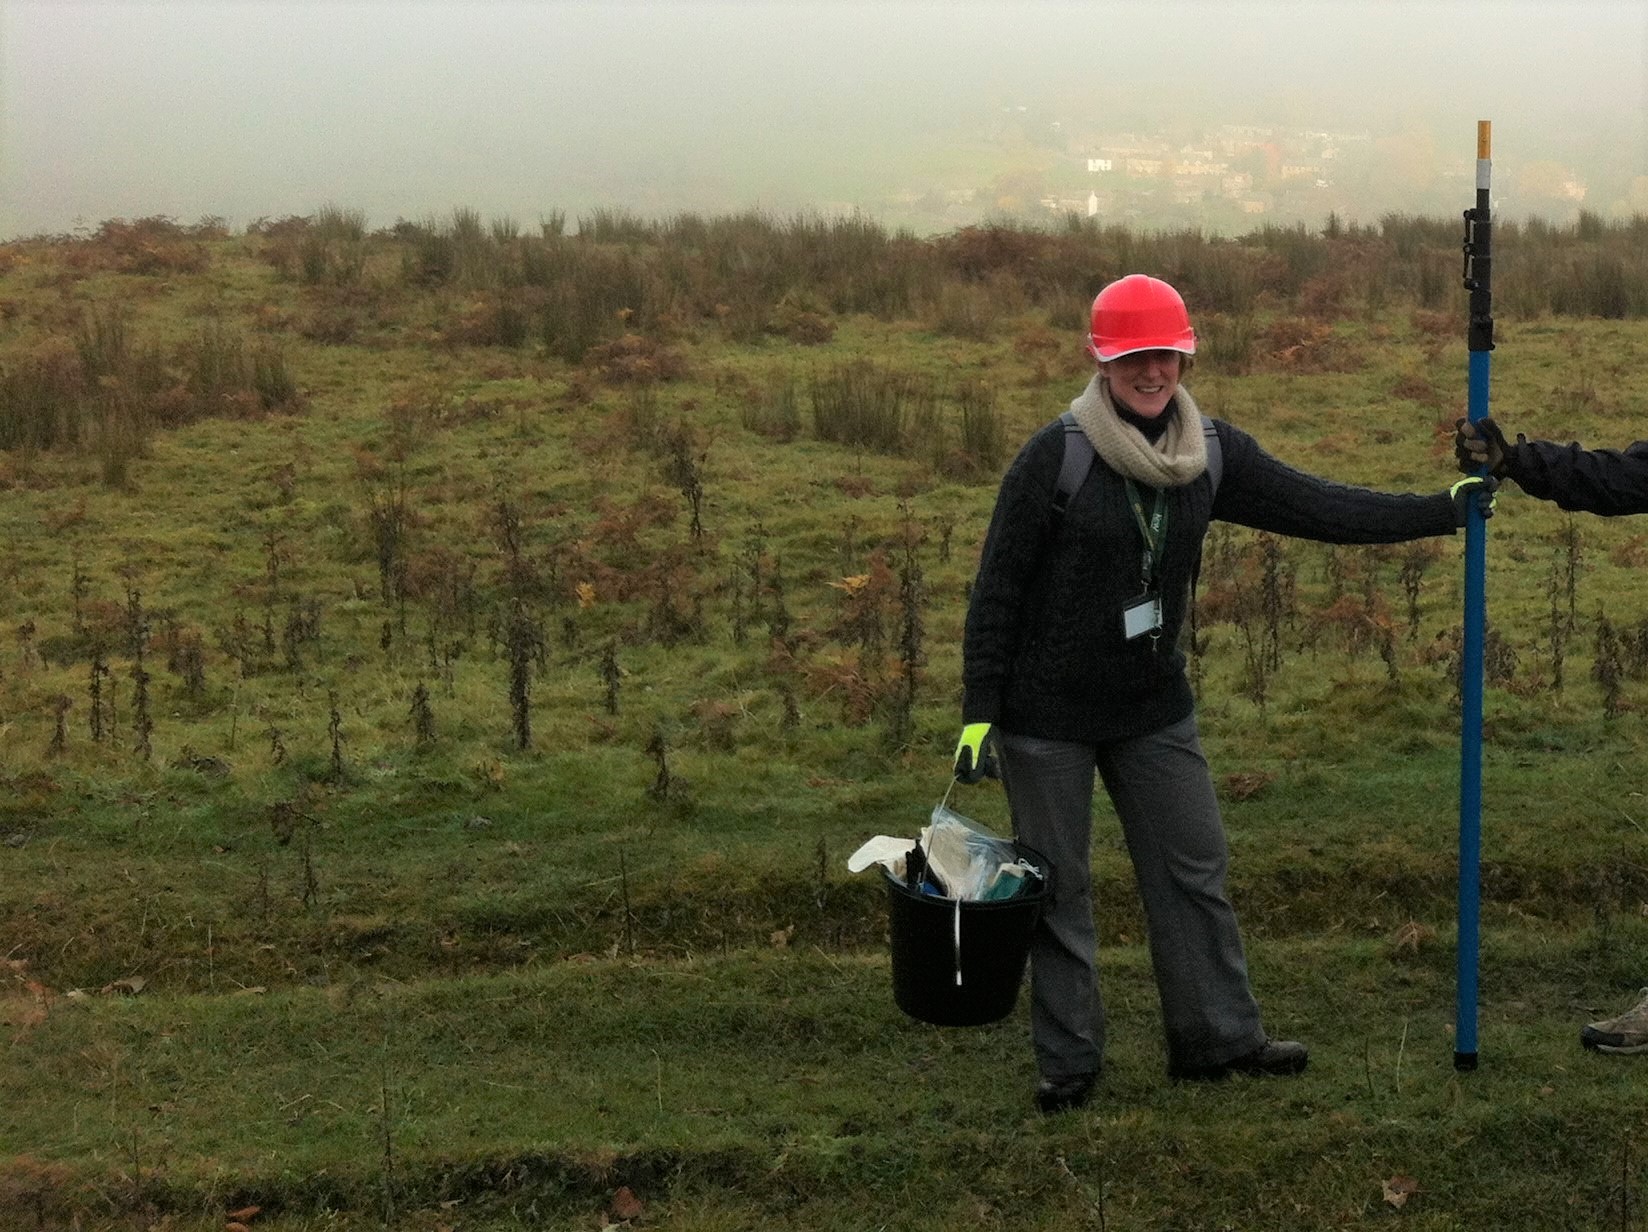 Naomi stood smiling holding a pole pruner and a bucket, wearing a hard hat on a misty hill top.